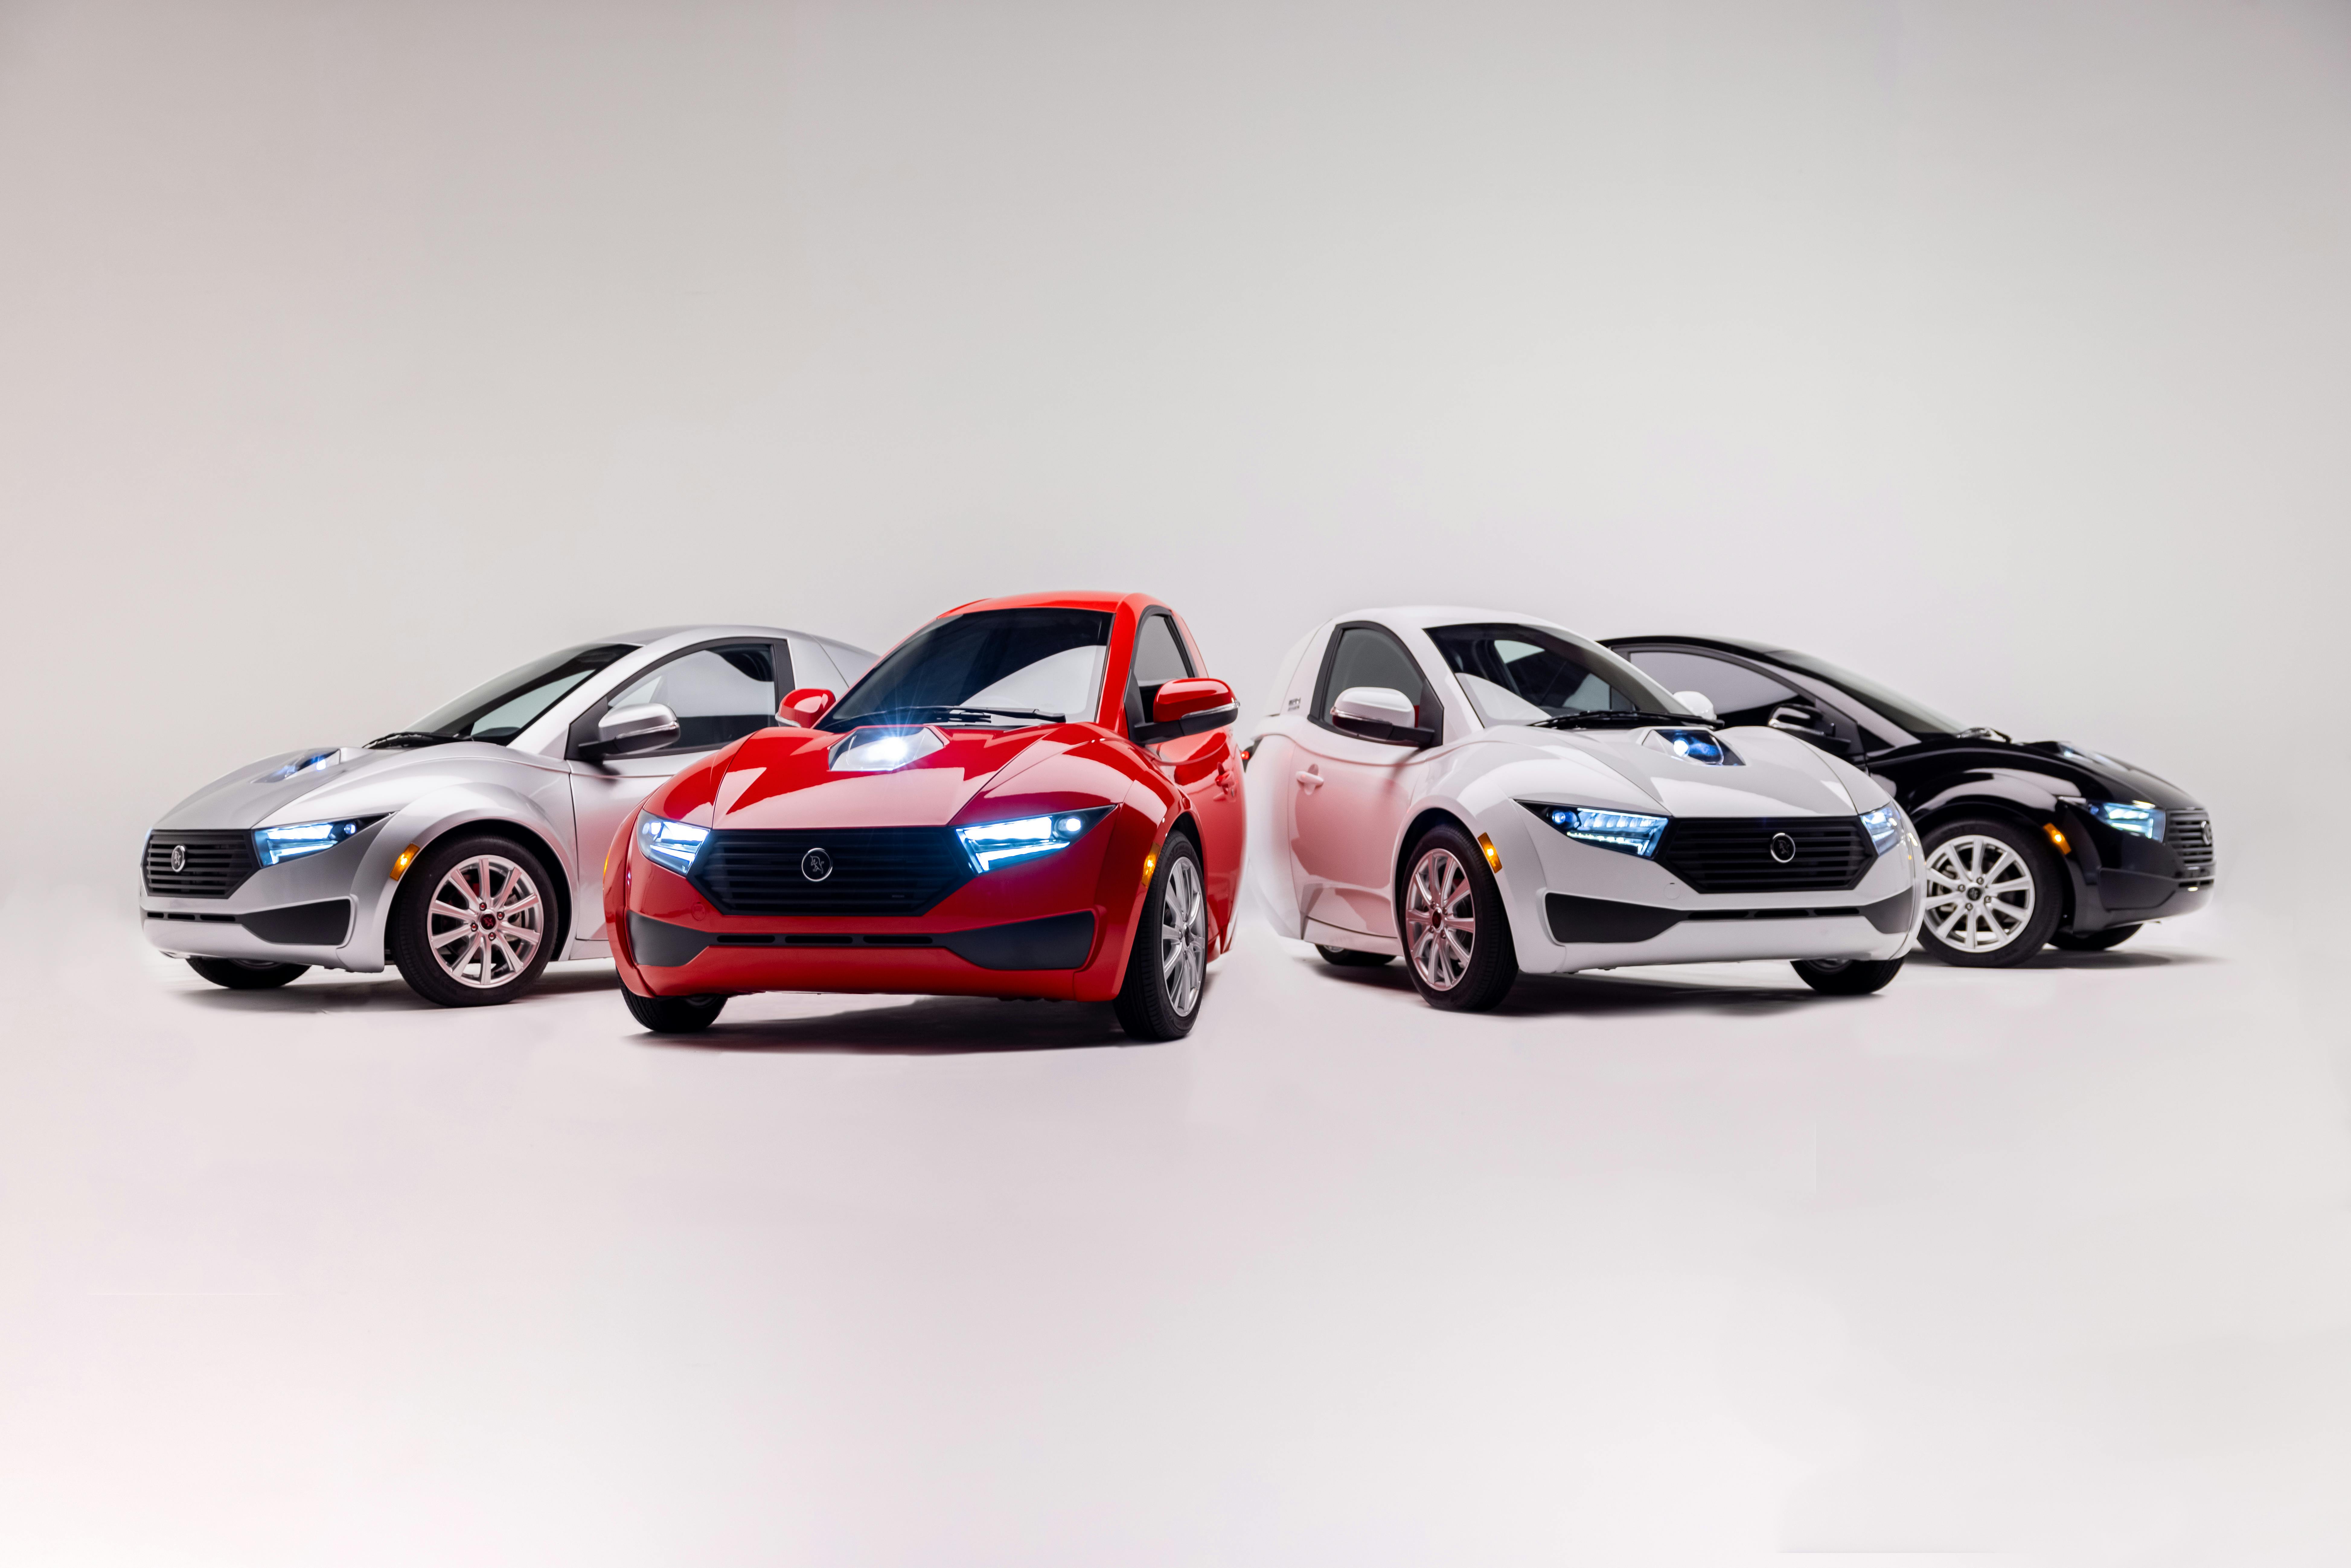 ElectraMeccanica to Showcase Lineup of SOLO EVs at Los Angeles Auto Show, A Premier National Auto Show